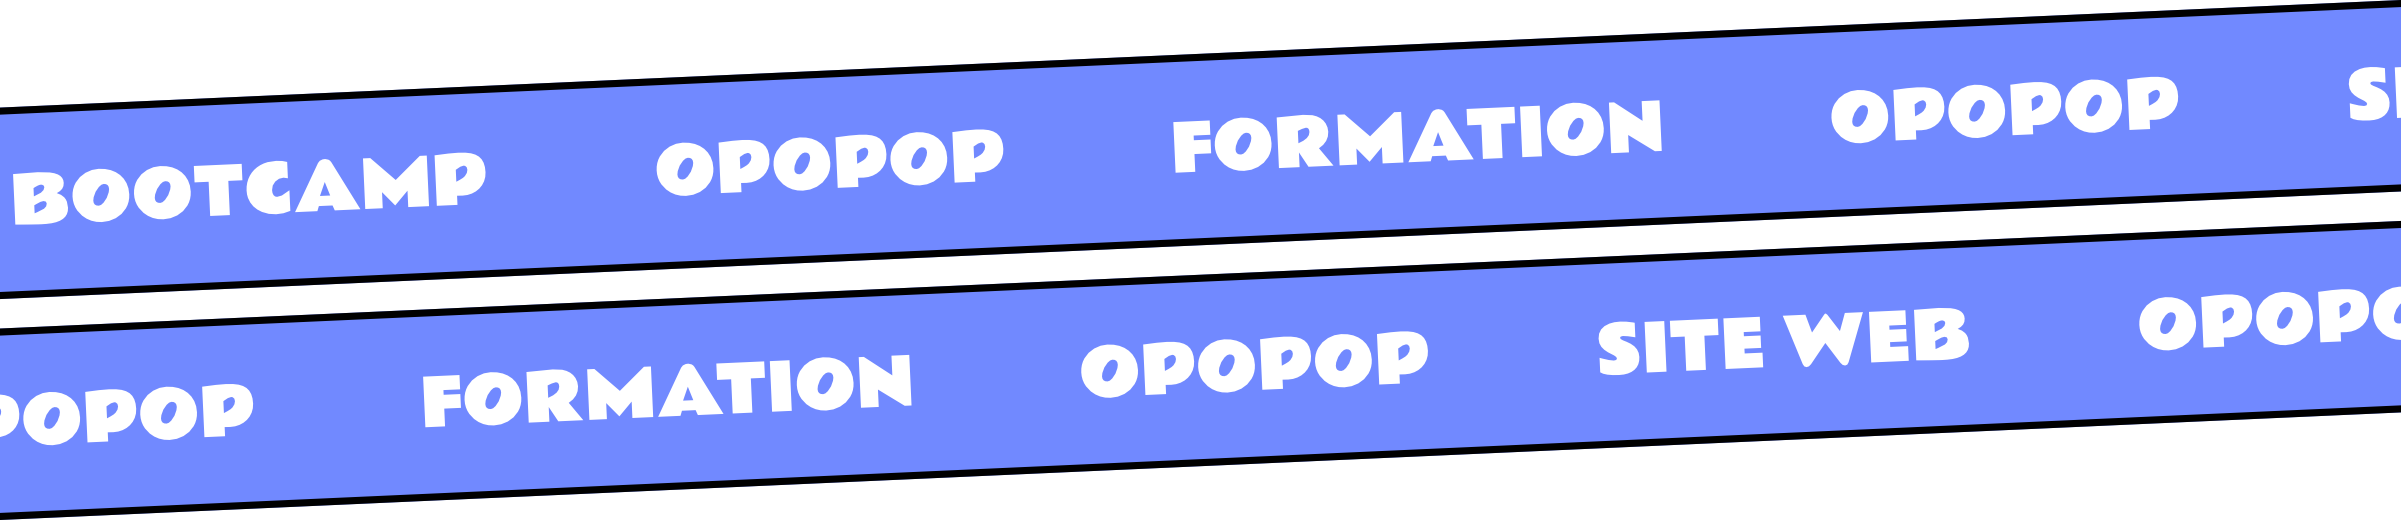 Opopop Bootcamp Formation Site Web